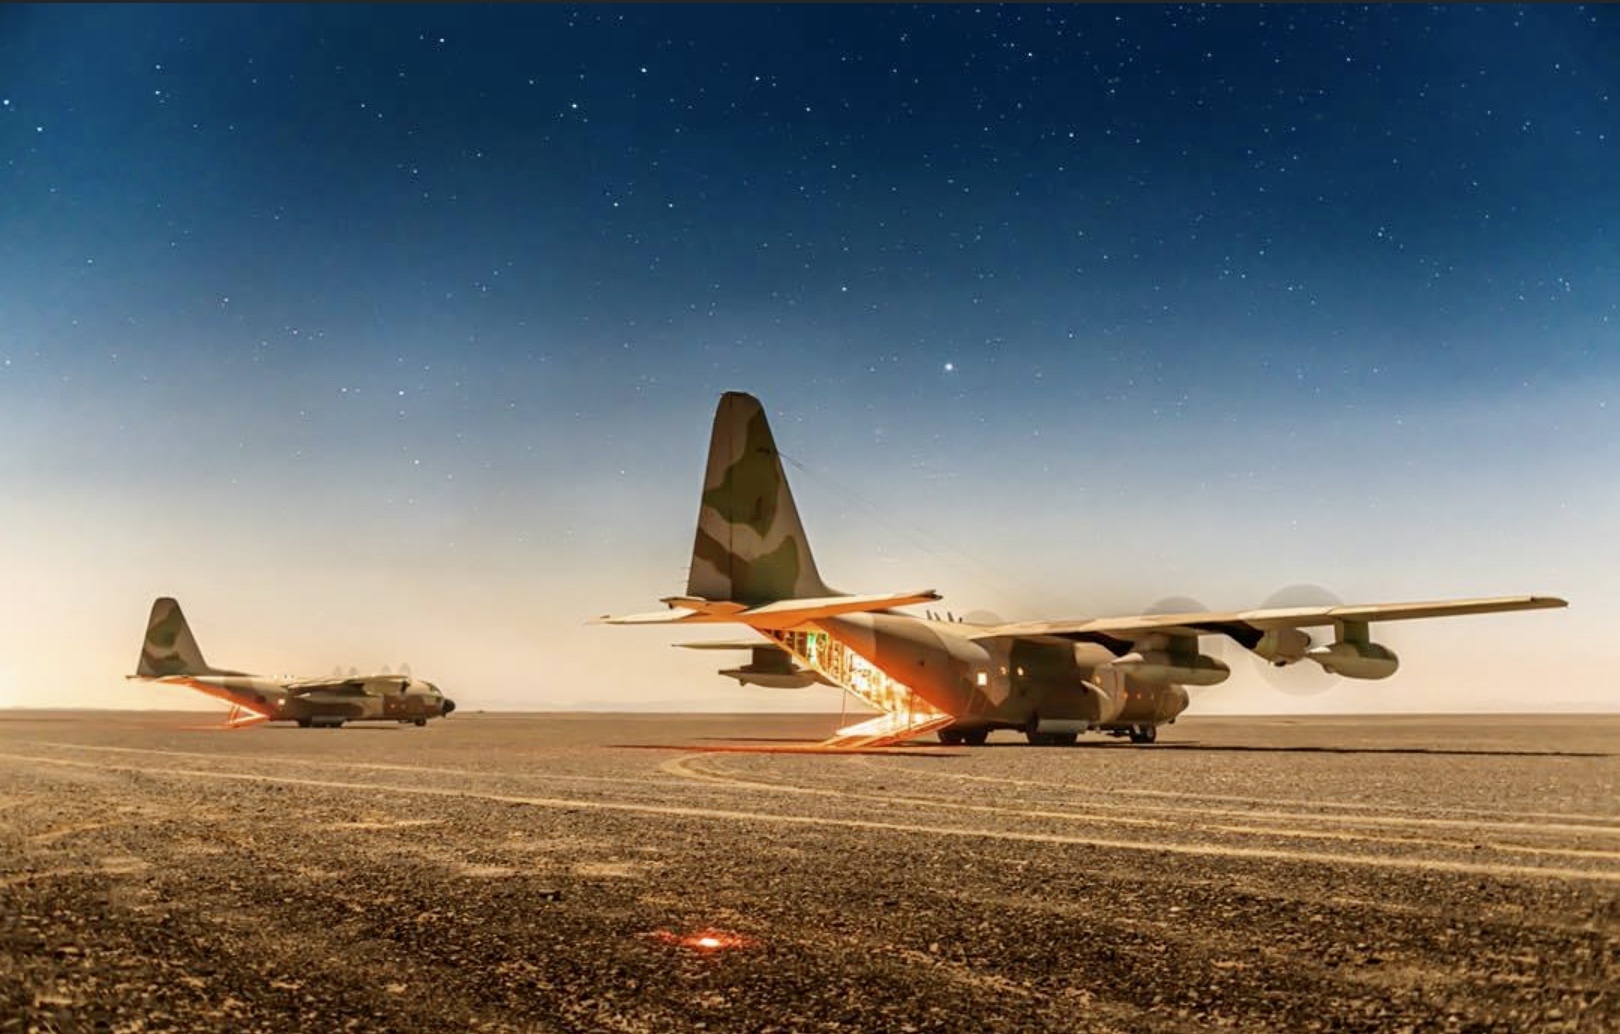 low light full color night vision image of military plane